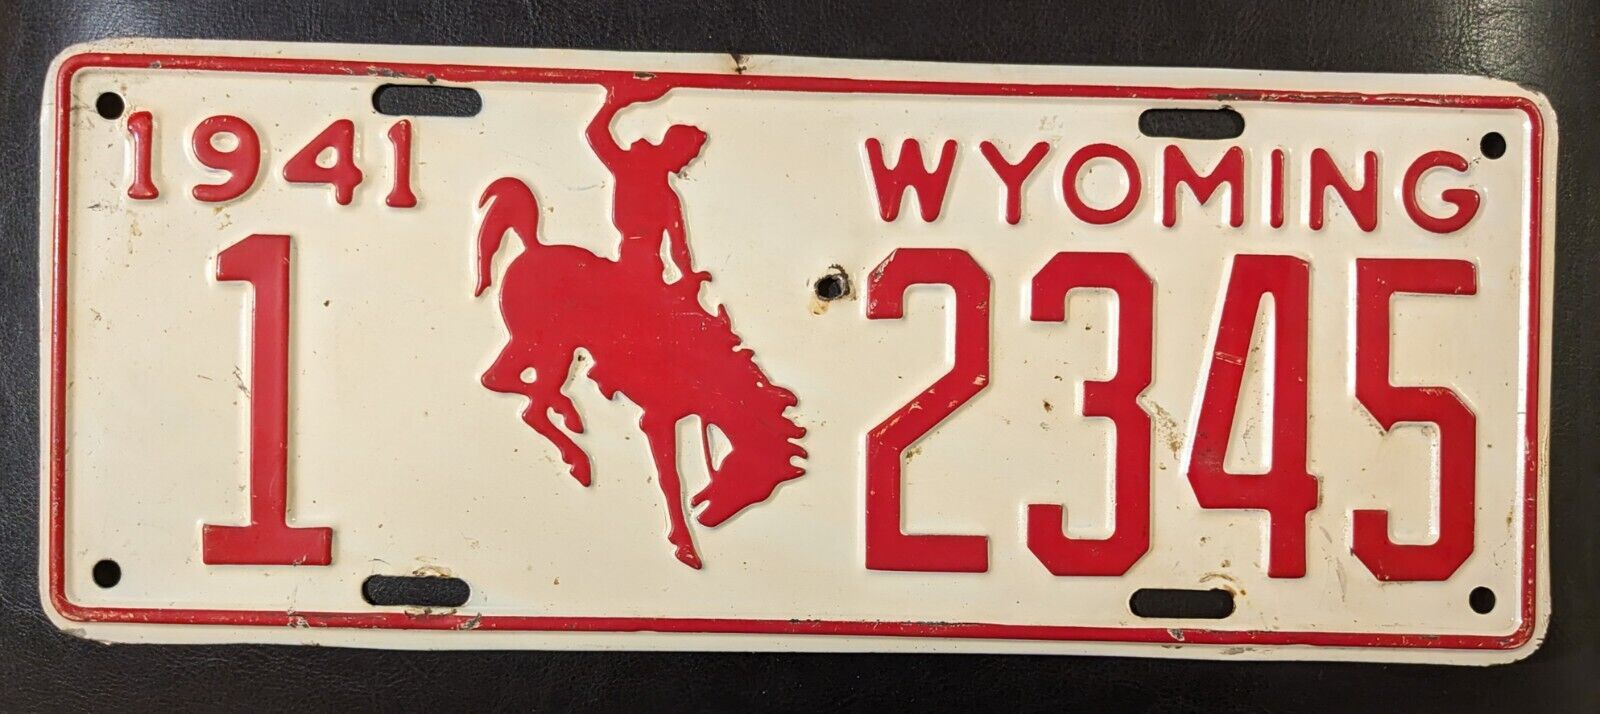 All Original 1941 Wyoming Passenger License Plate 1-2345 Consecutive Numbering